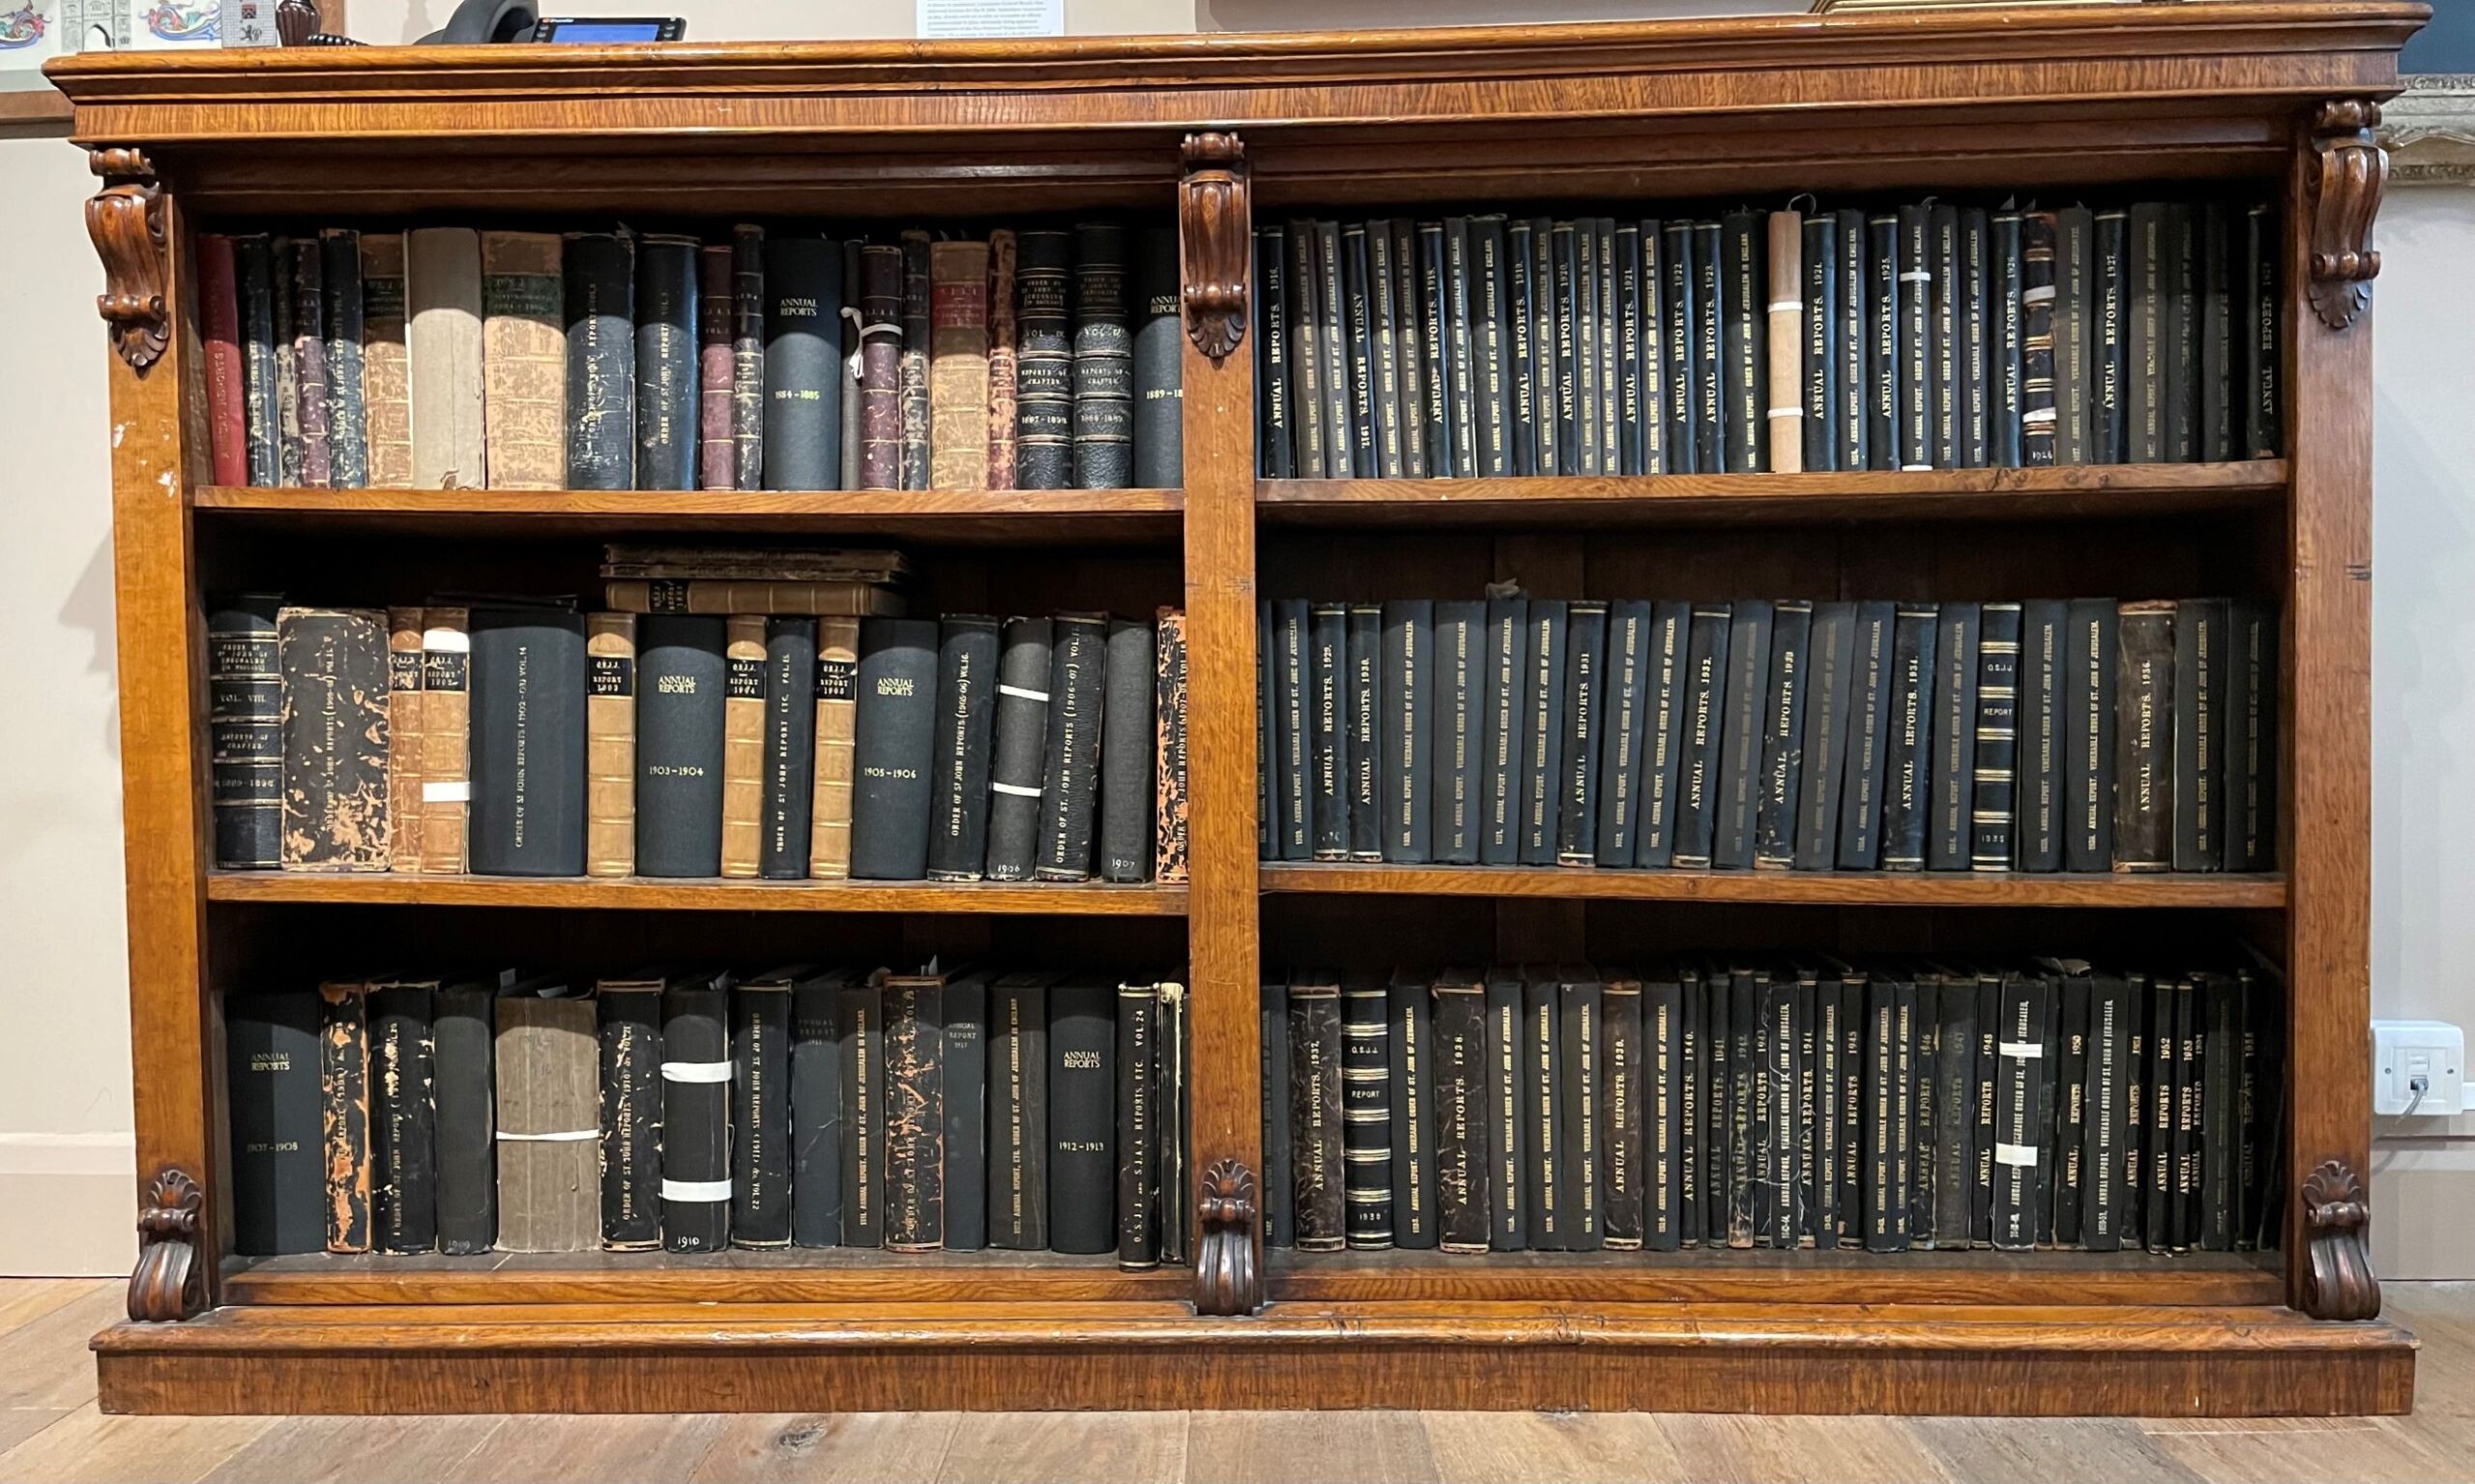 A bookcase of old books